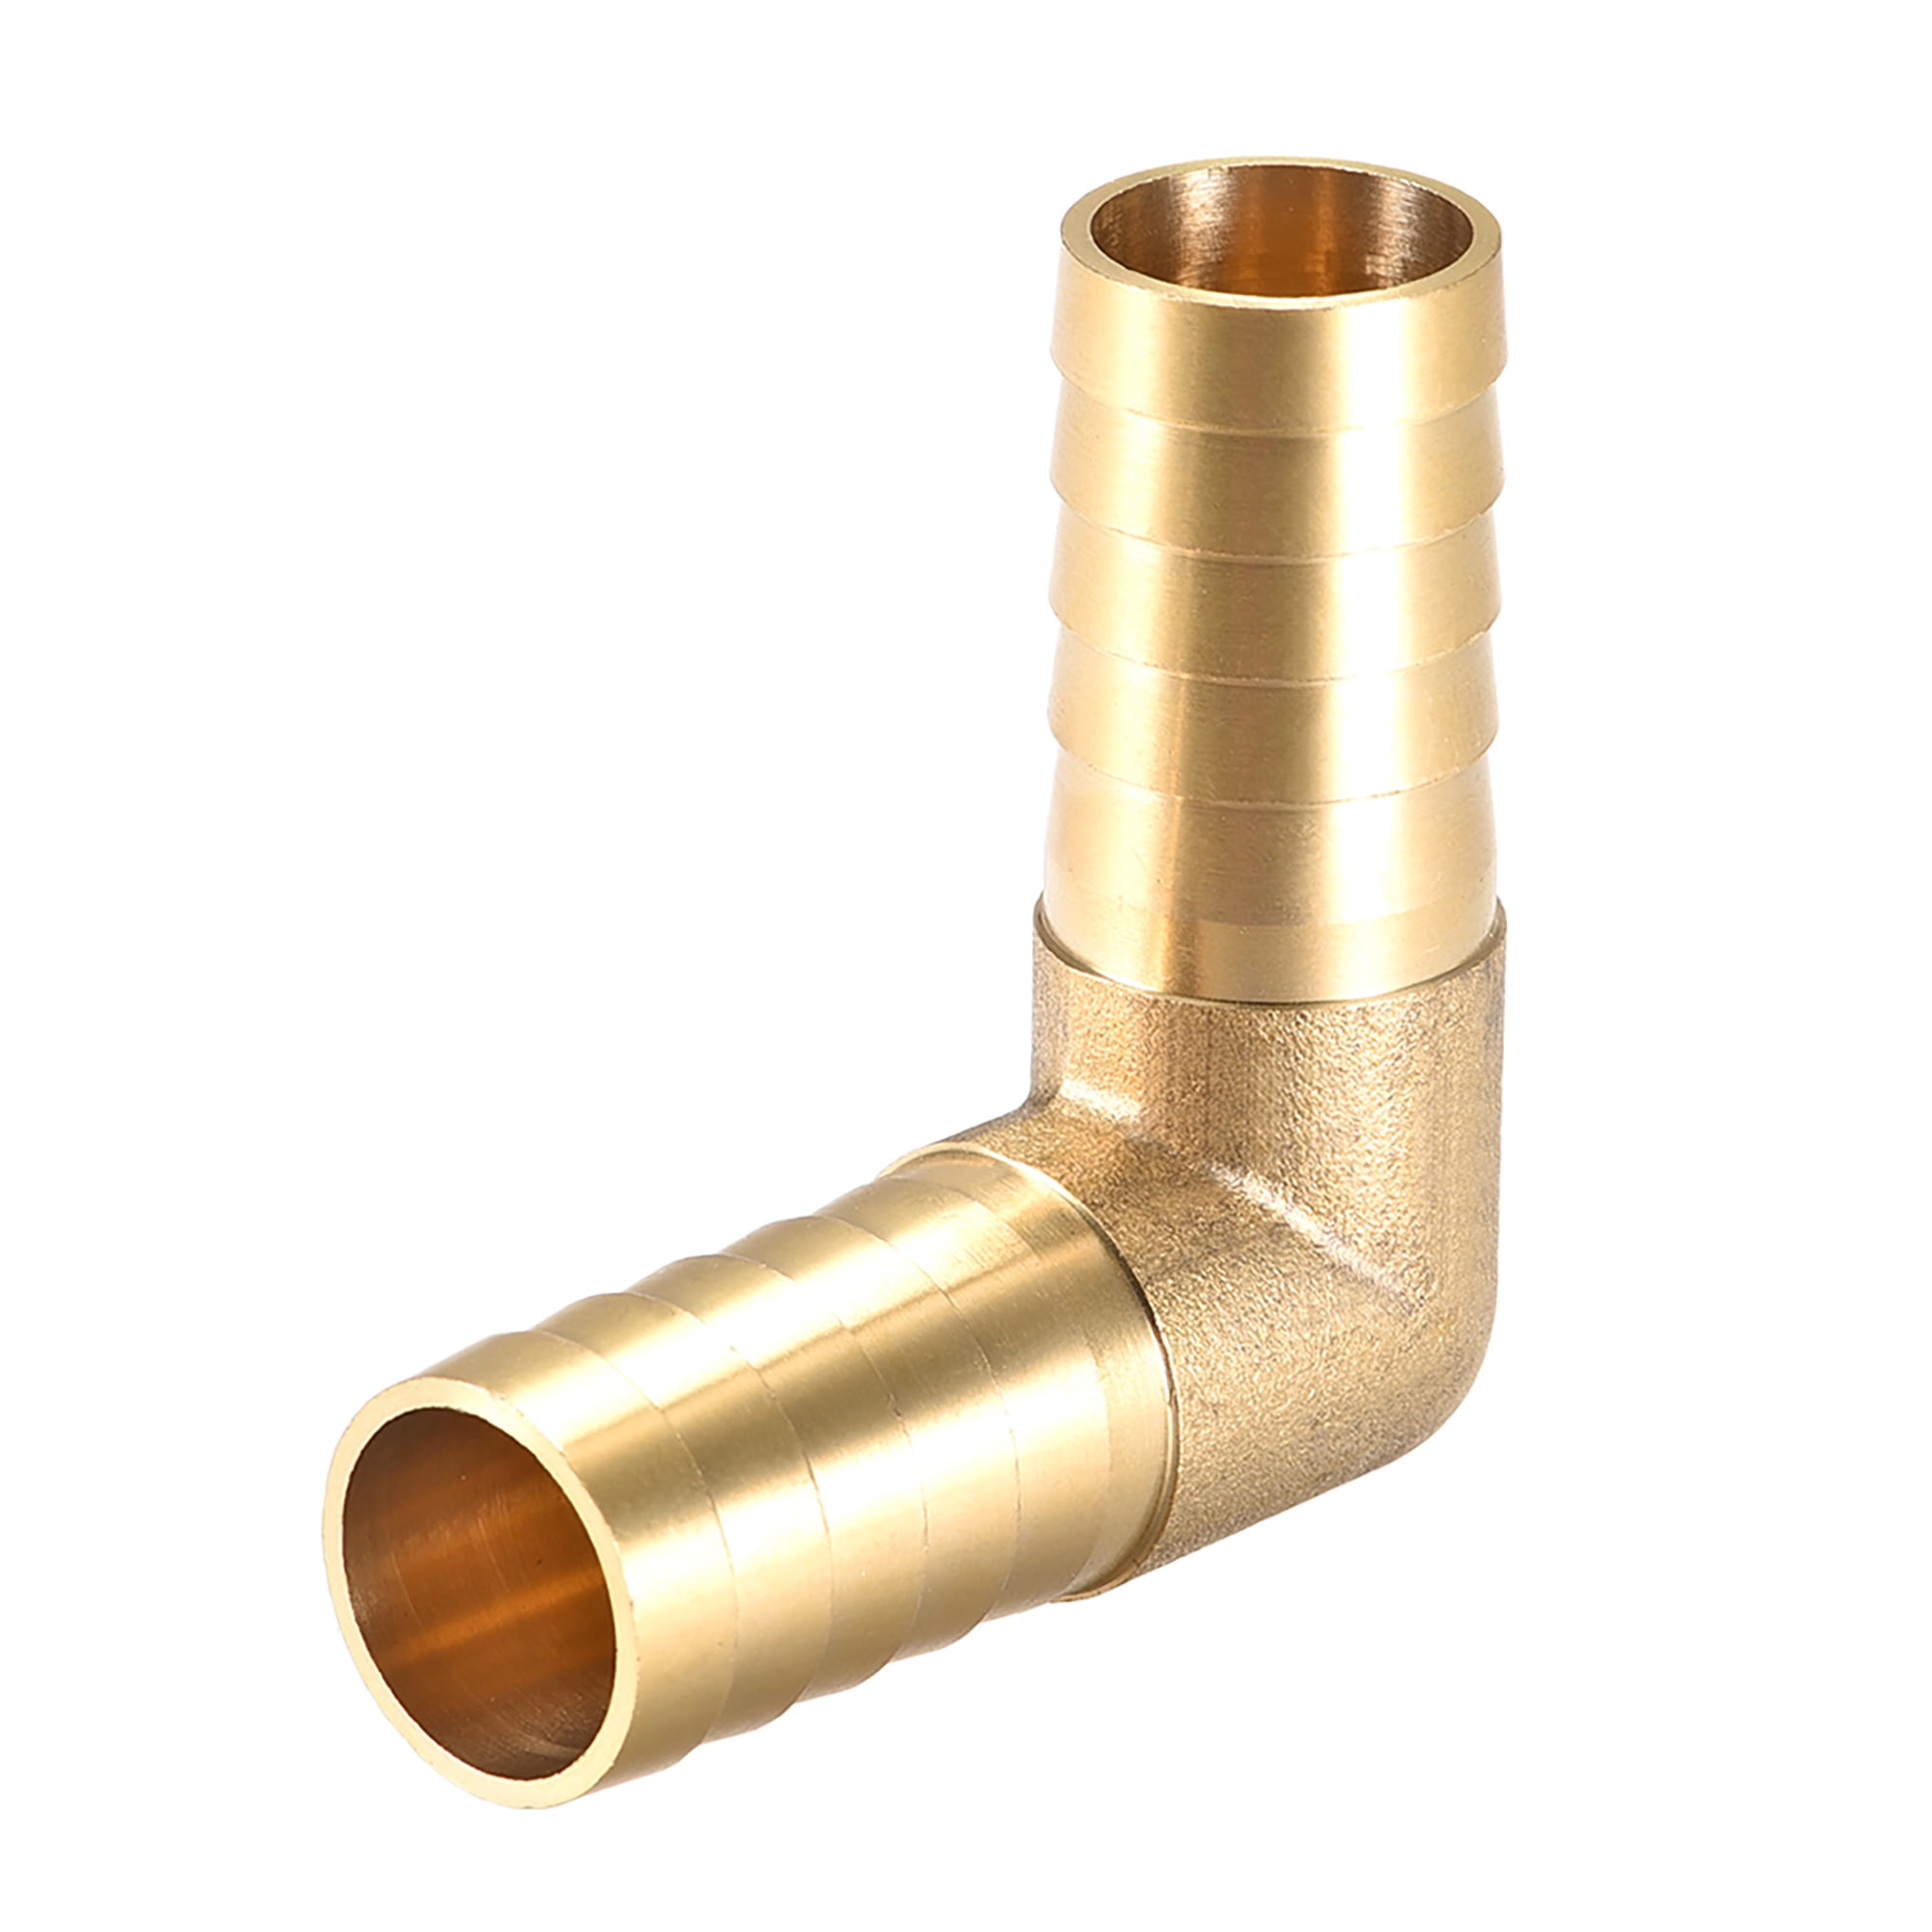 WATER AIR FUEL CONNECTOR. 2 x 20mm ELBOW BARBED PLASTIC HOSE JOINER 